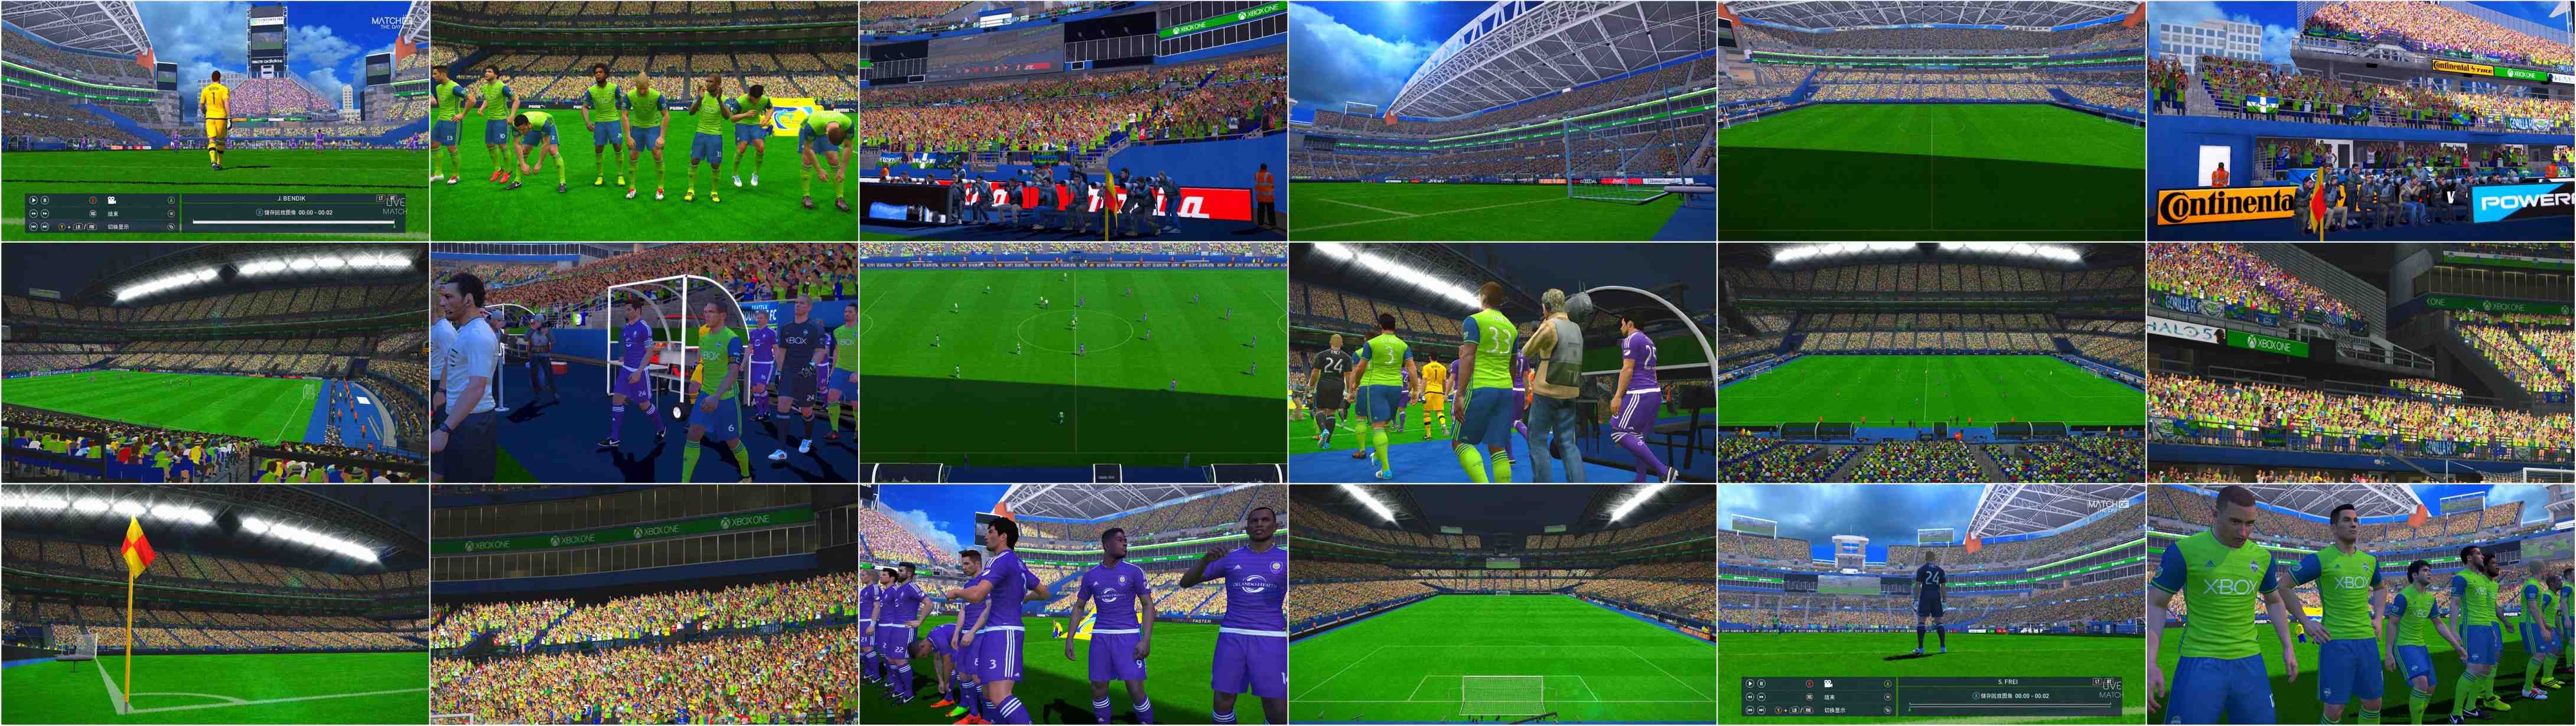 pes 2013 multi converter pc to ps3